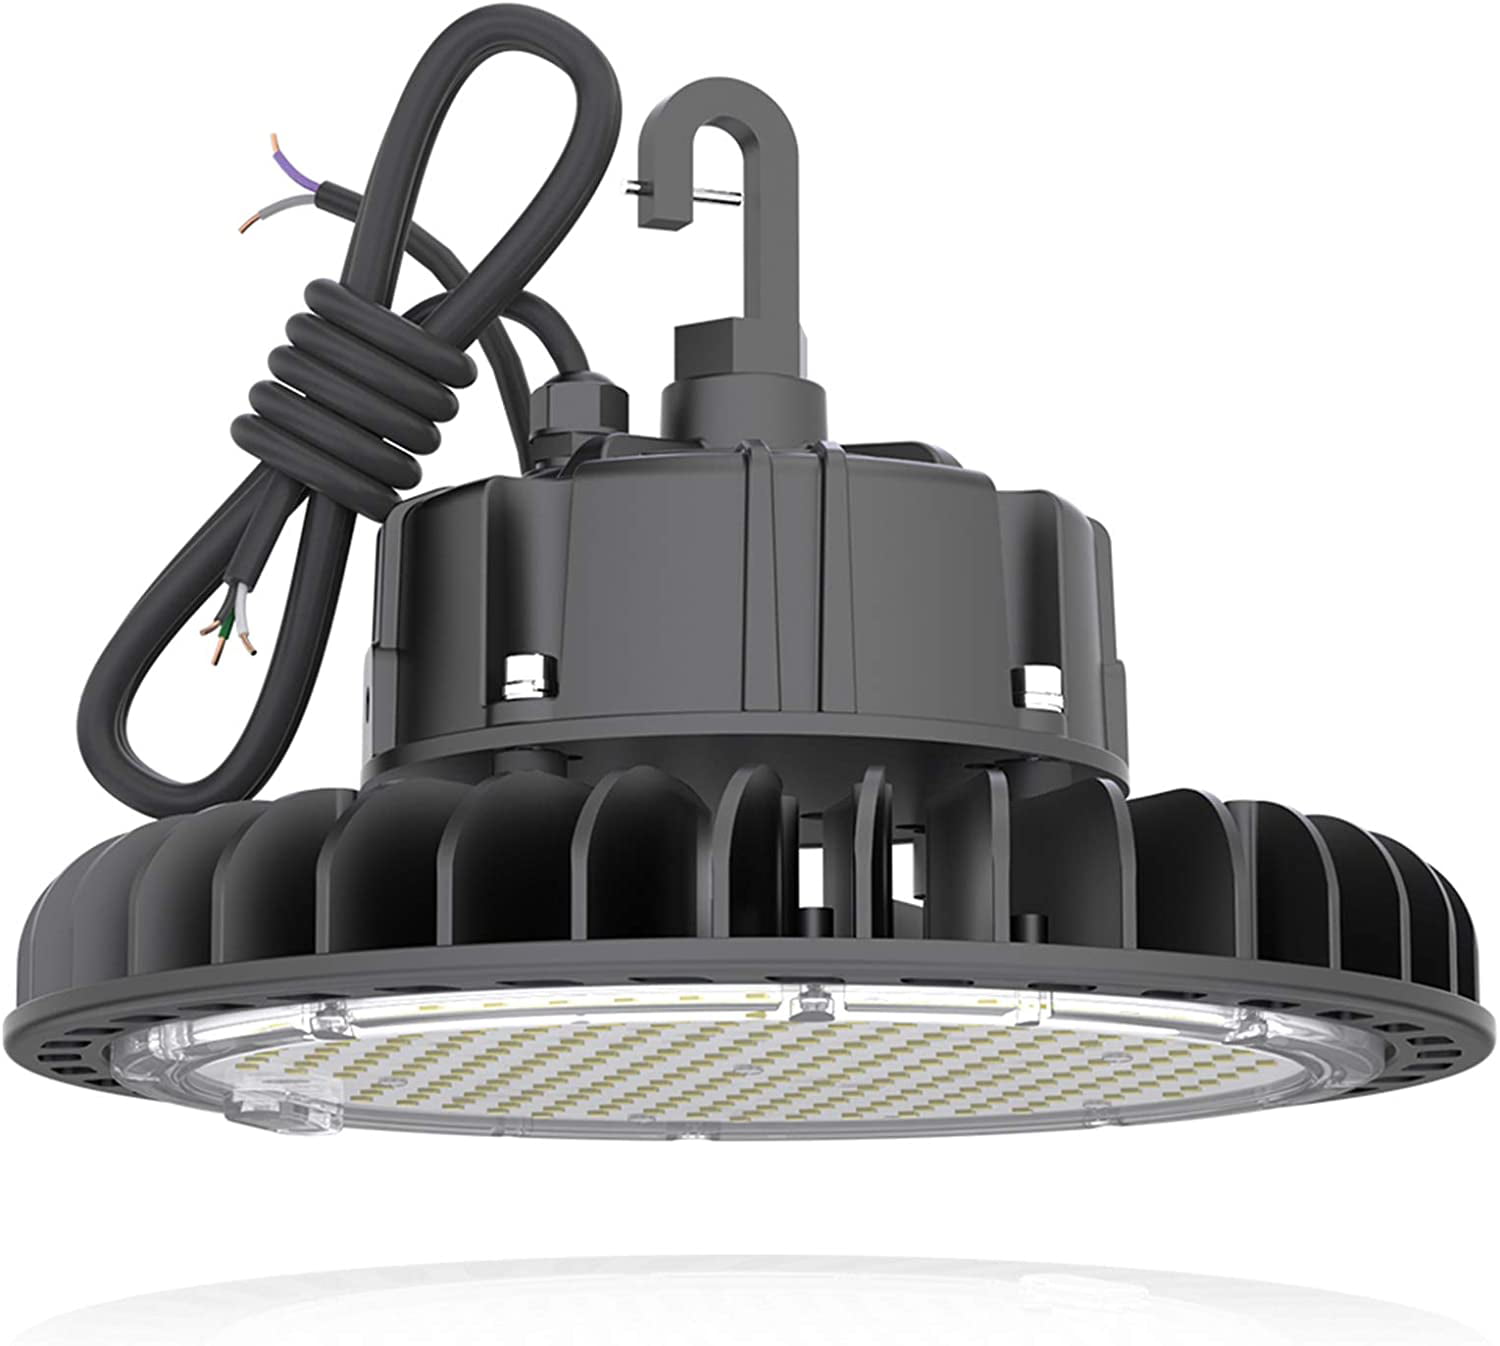 LED High Bay Light28000LM（ 200W ）Dimmable LED UFO High Bay Warehouse Lighting 